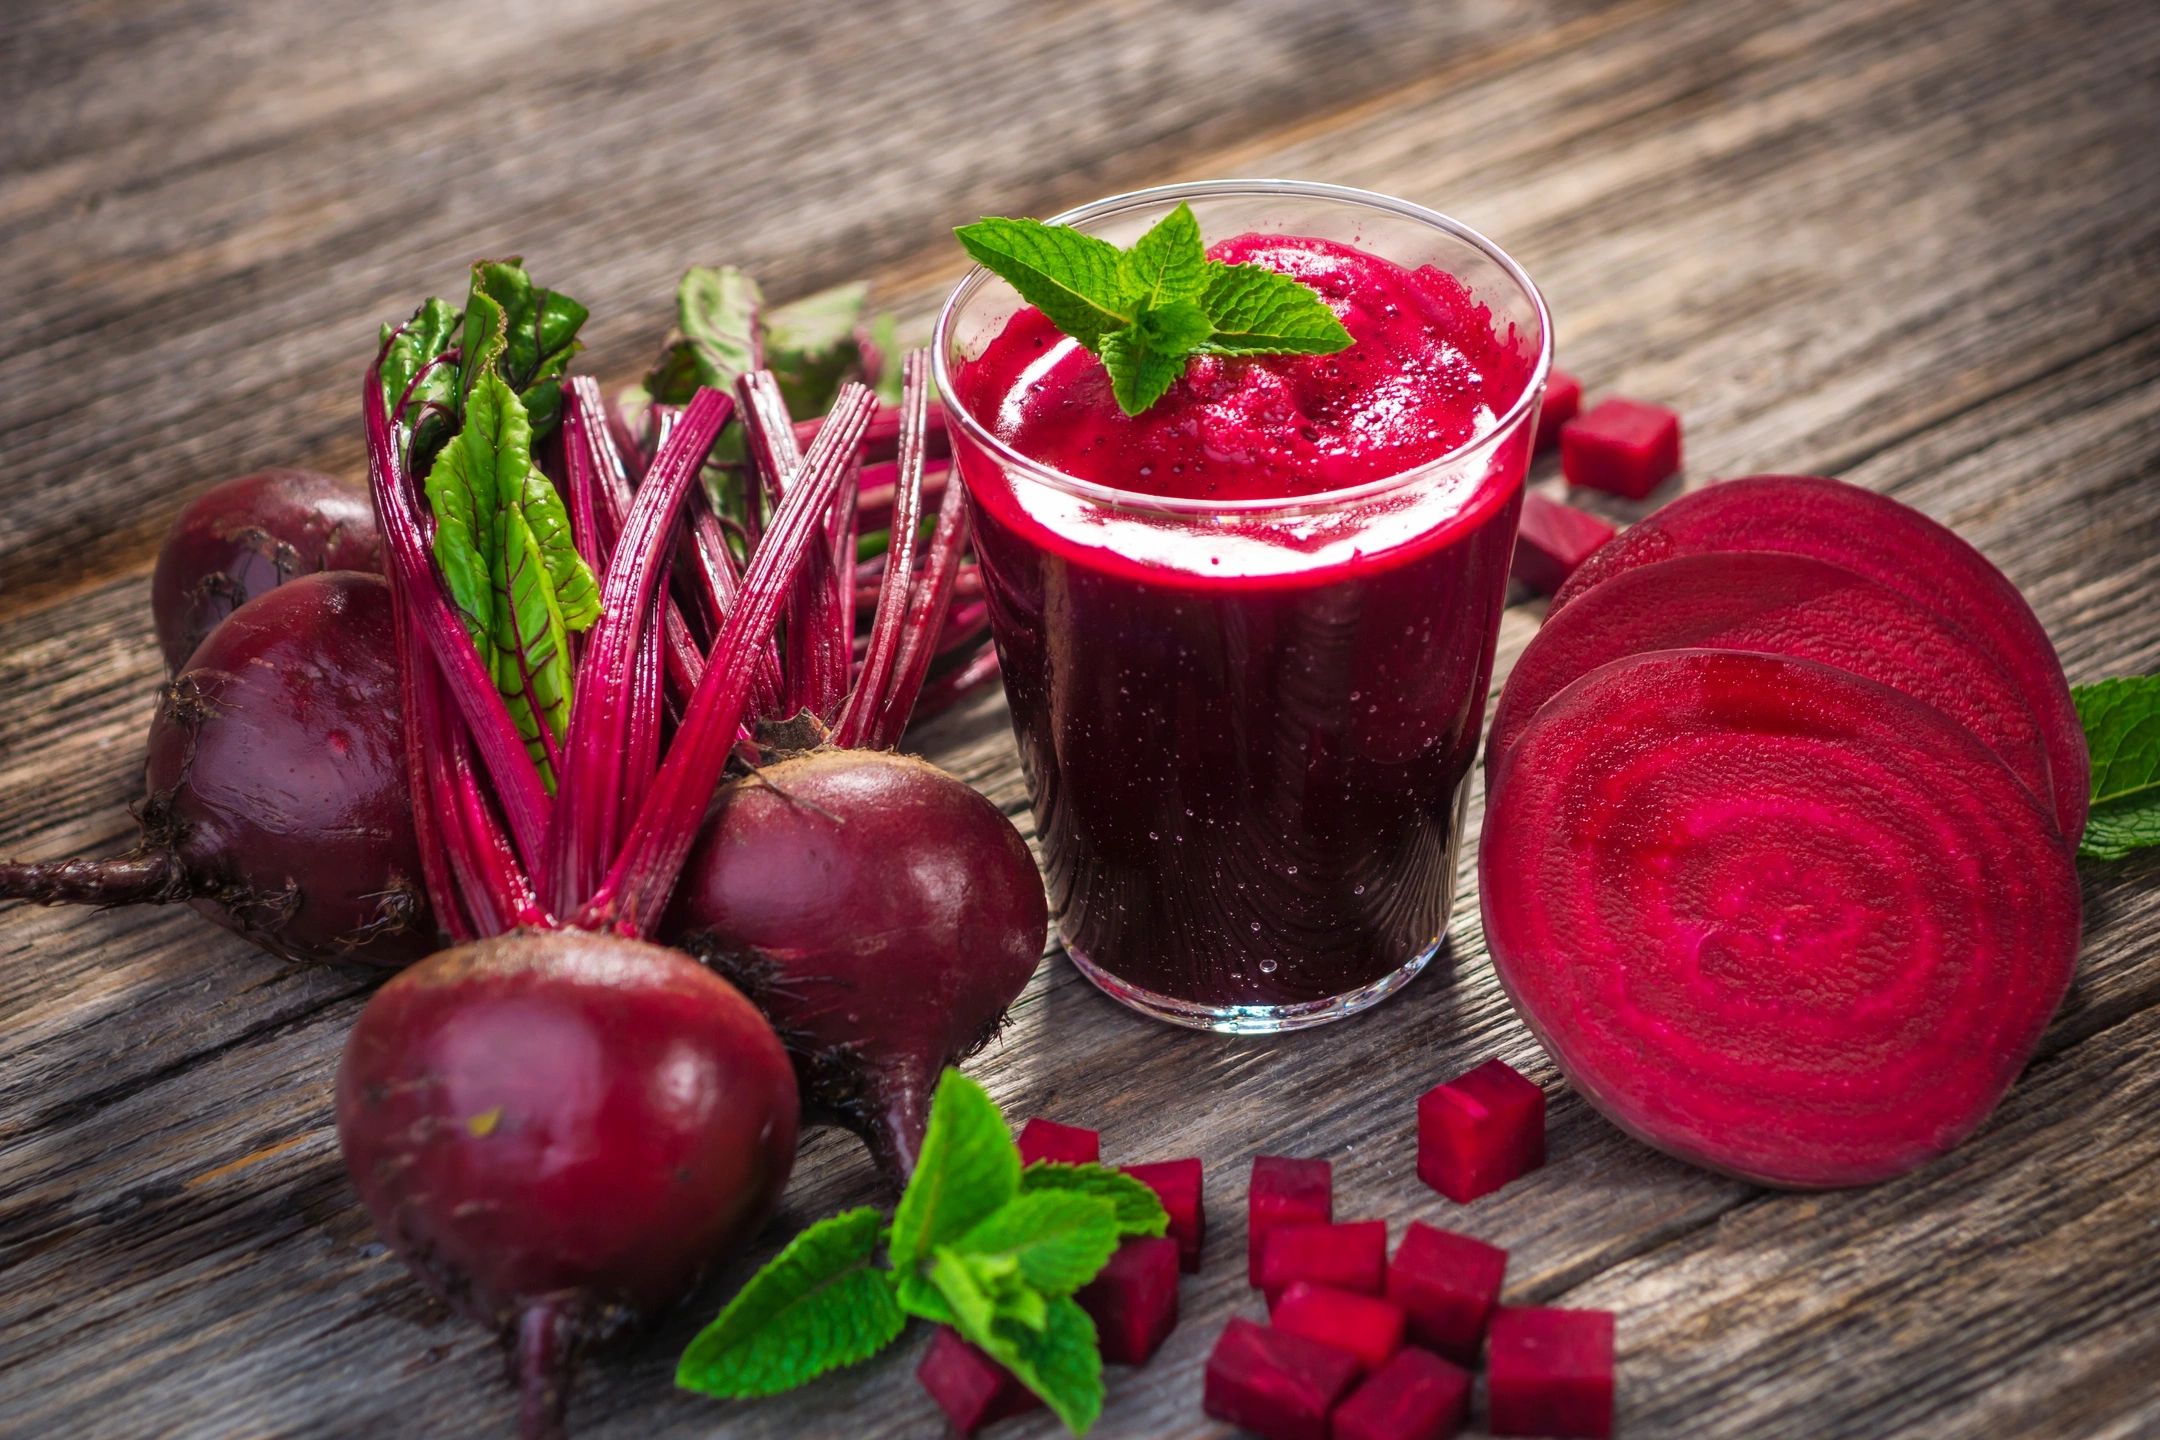 BEETS: THE FORGOTTEN VEGETABLE